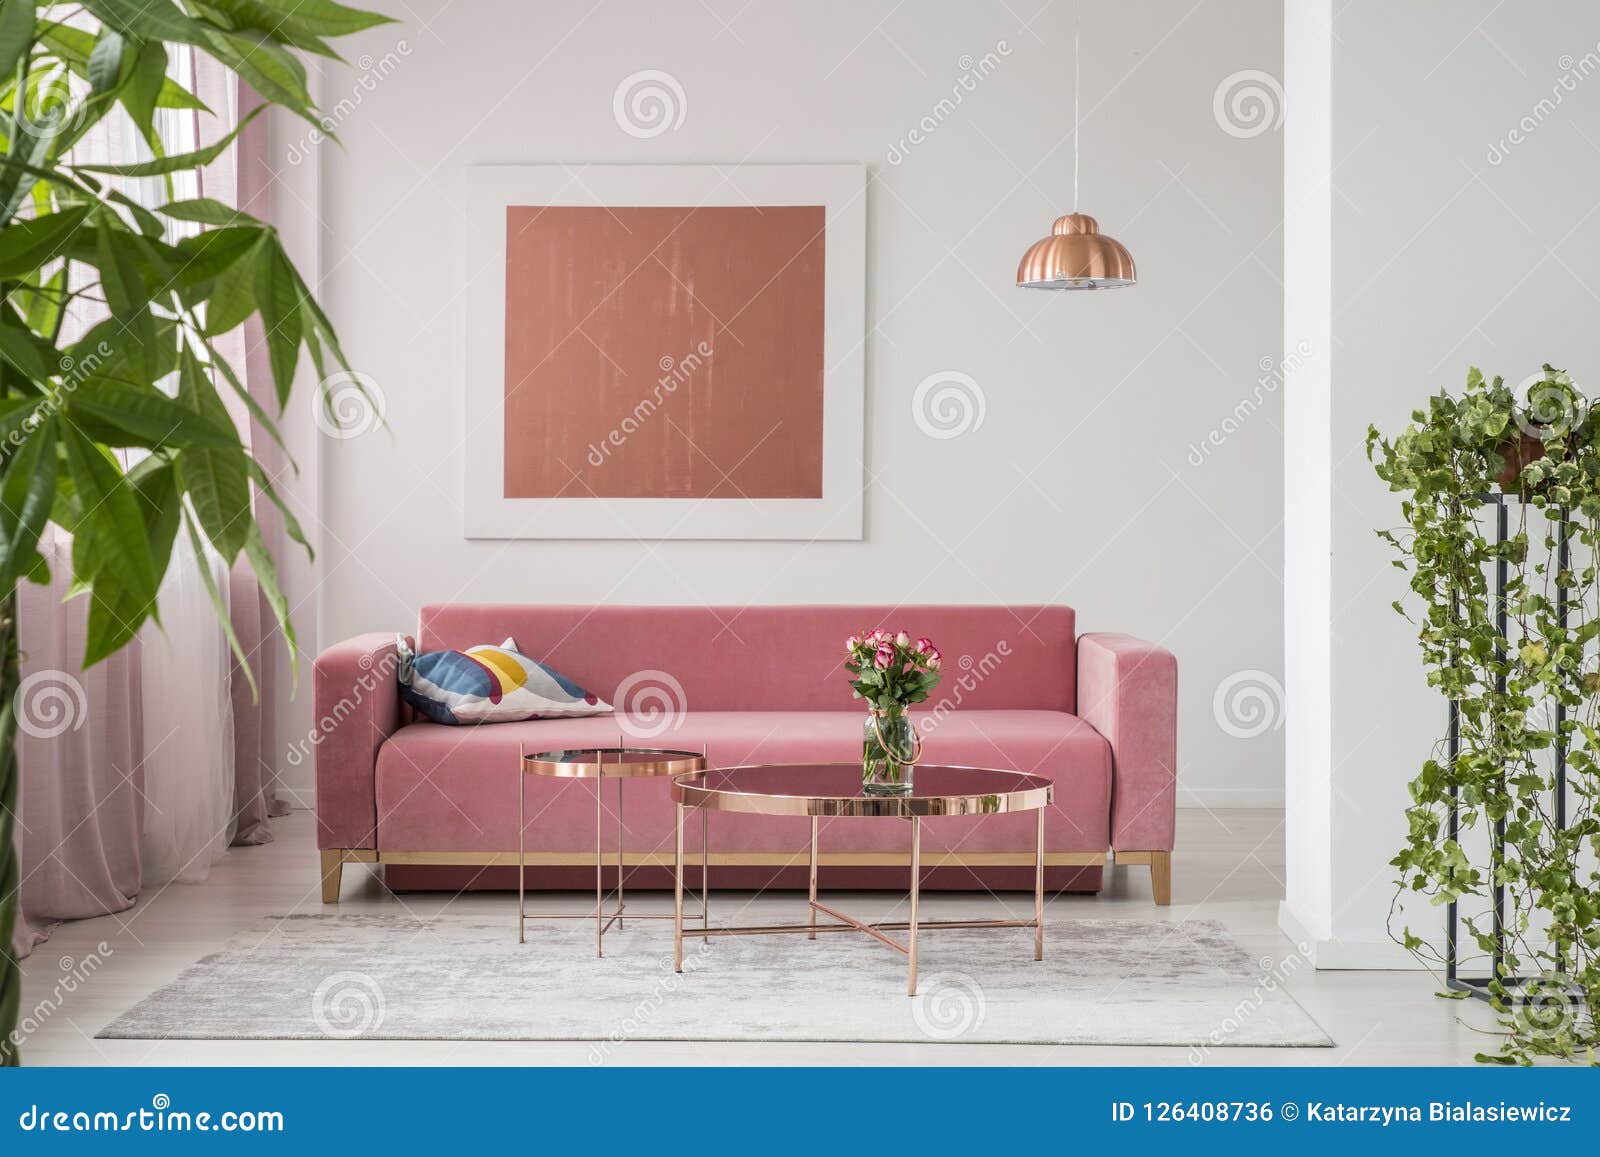 real photo of a pink couch, round coffee tables and painting in a modern living room interior